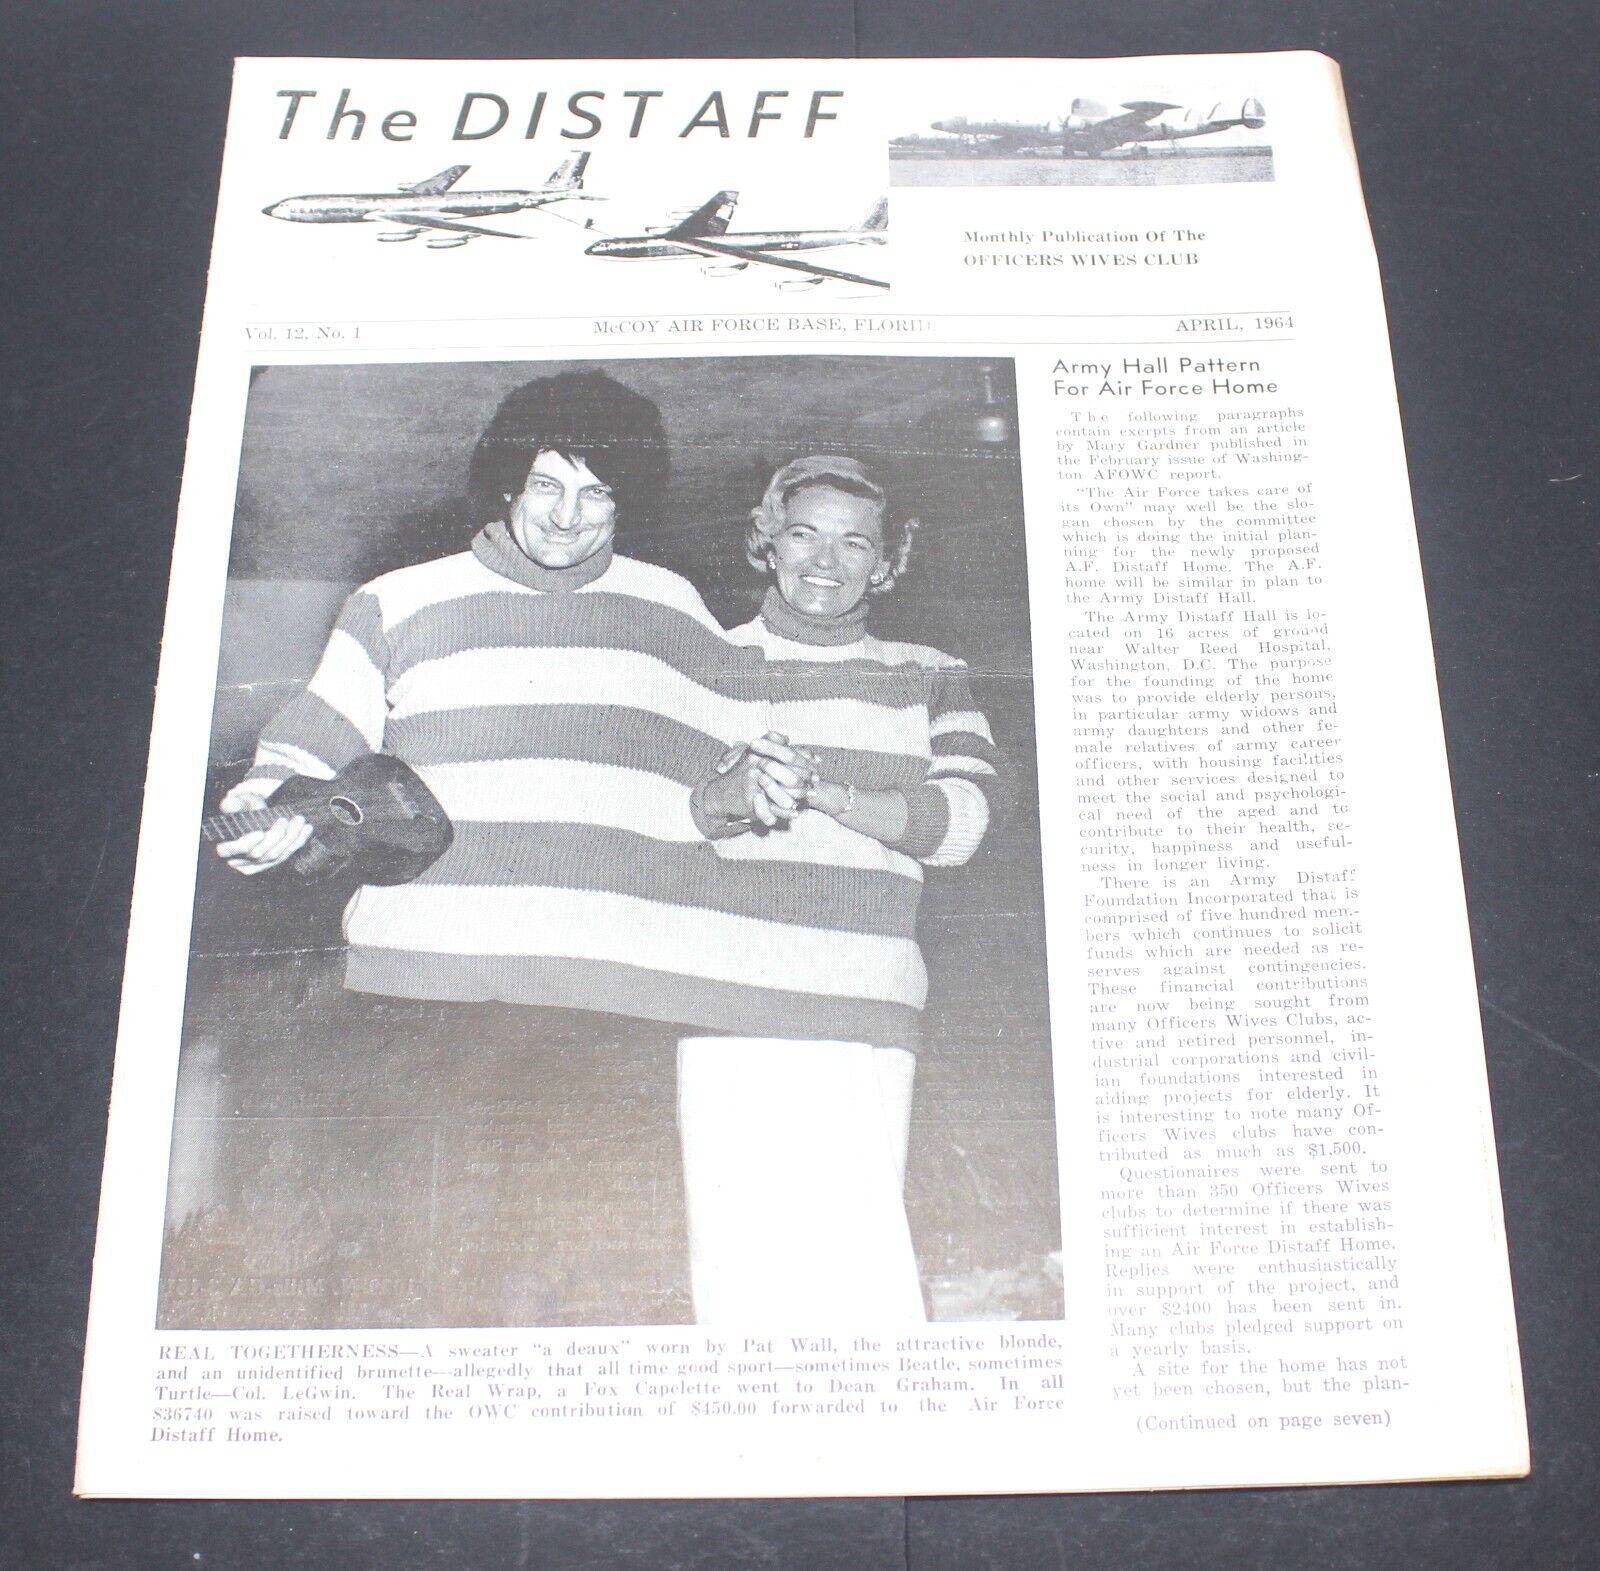 The Distaff McCoy Air Force Base Orlando FL Wives Club Newsletter April 1964